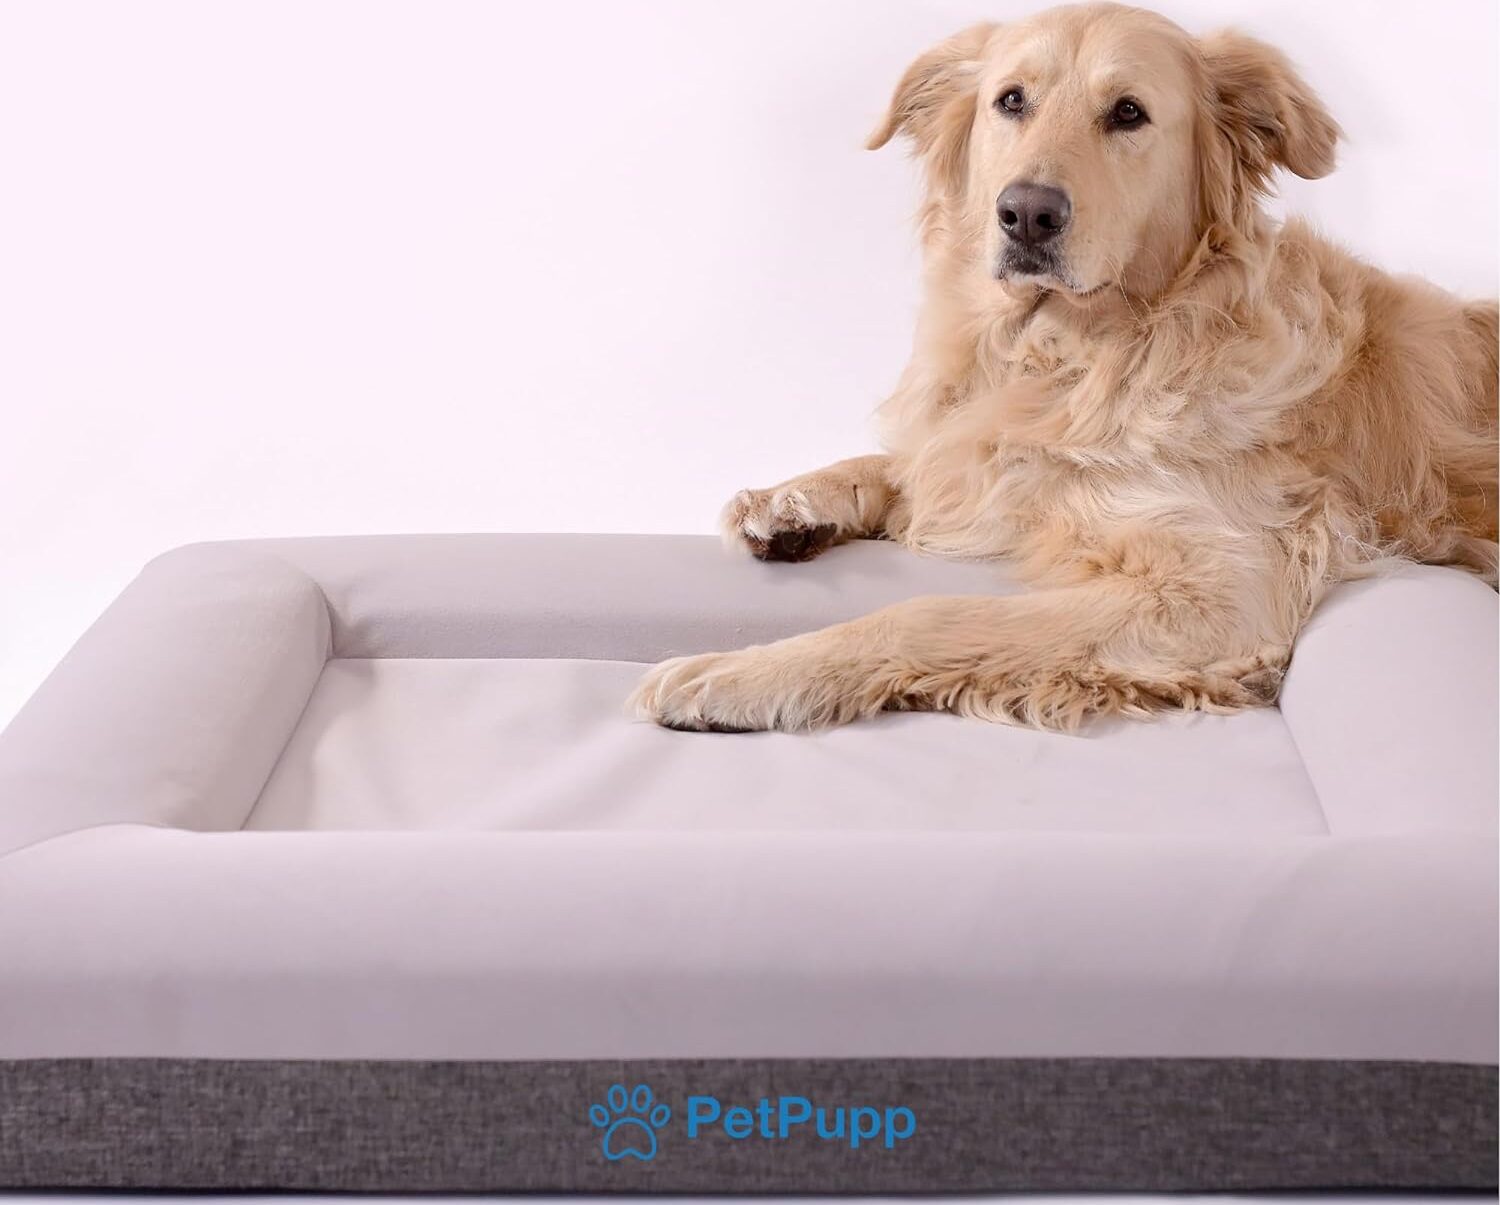 PETPUPP PREMIUM DOG BEDS FOR LARGE AND MEDIUM DOGS –ORTHOPEDIC DOG BED